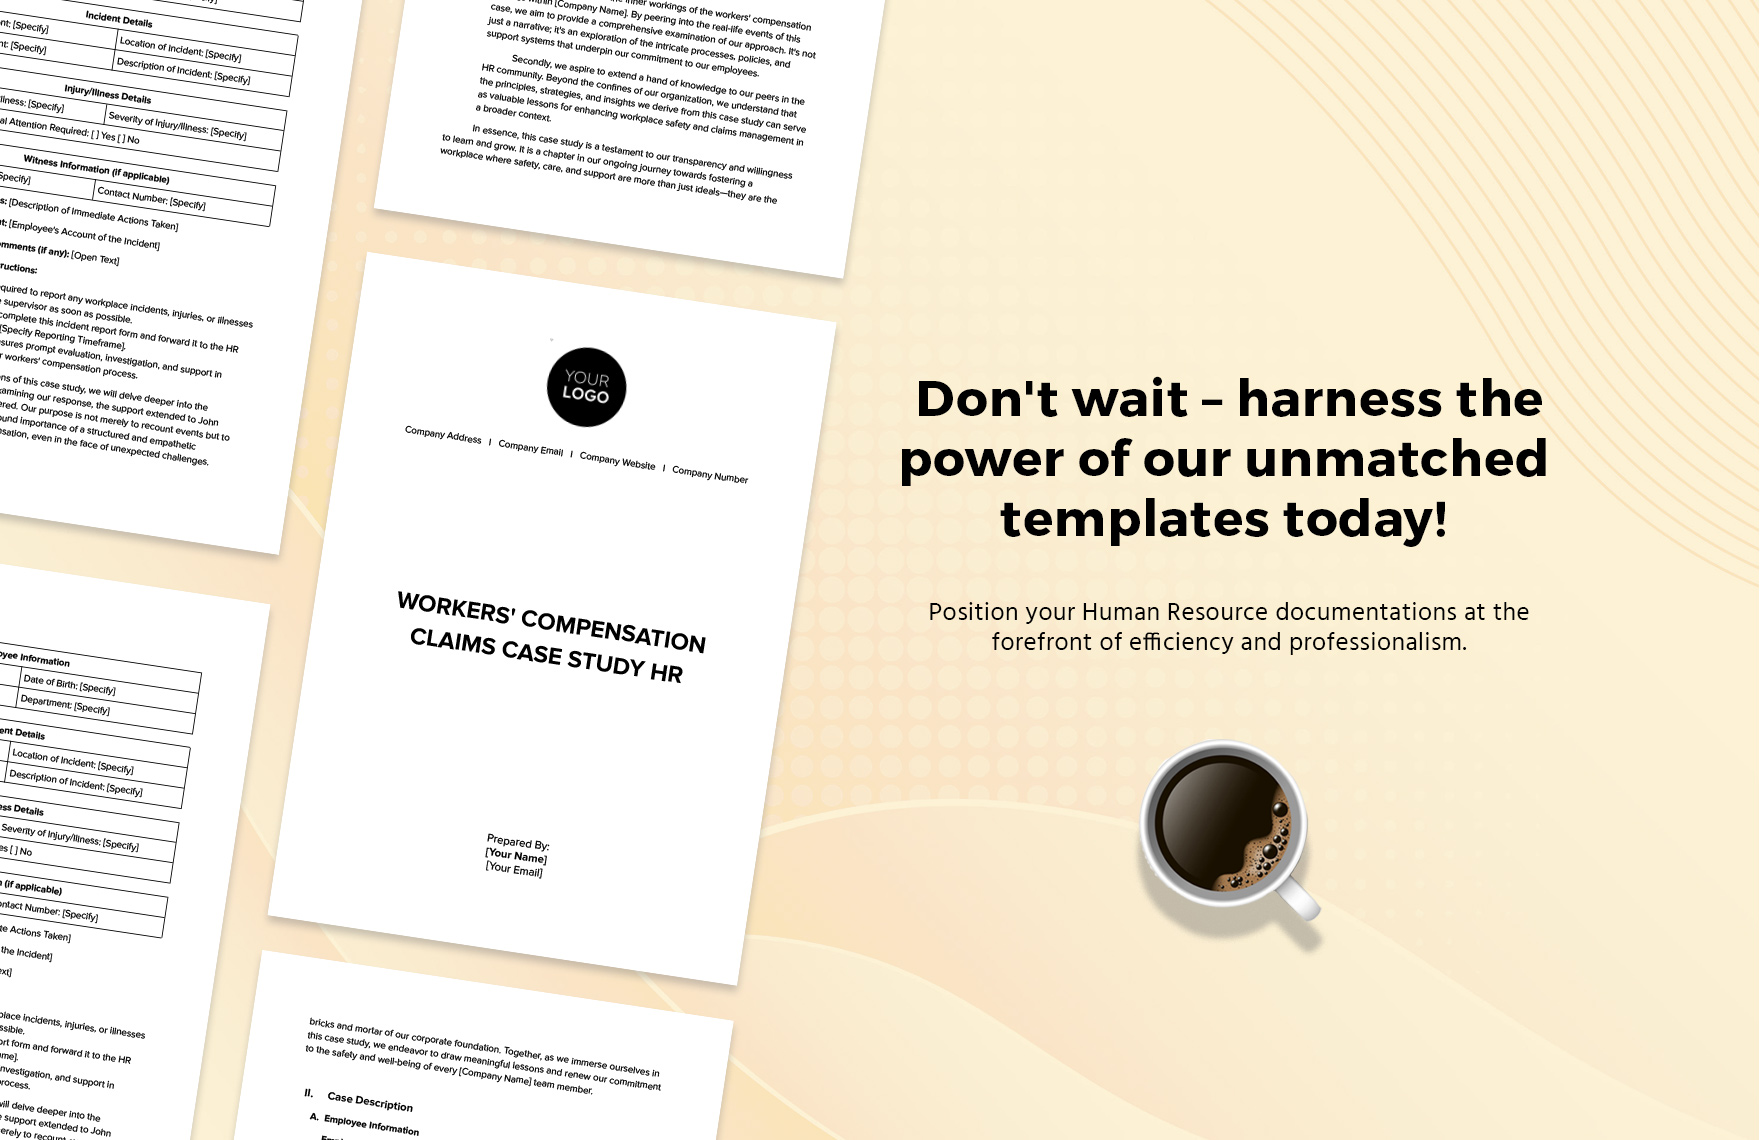 Workers' Compensation Claims Case Study HR Template